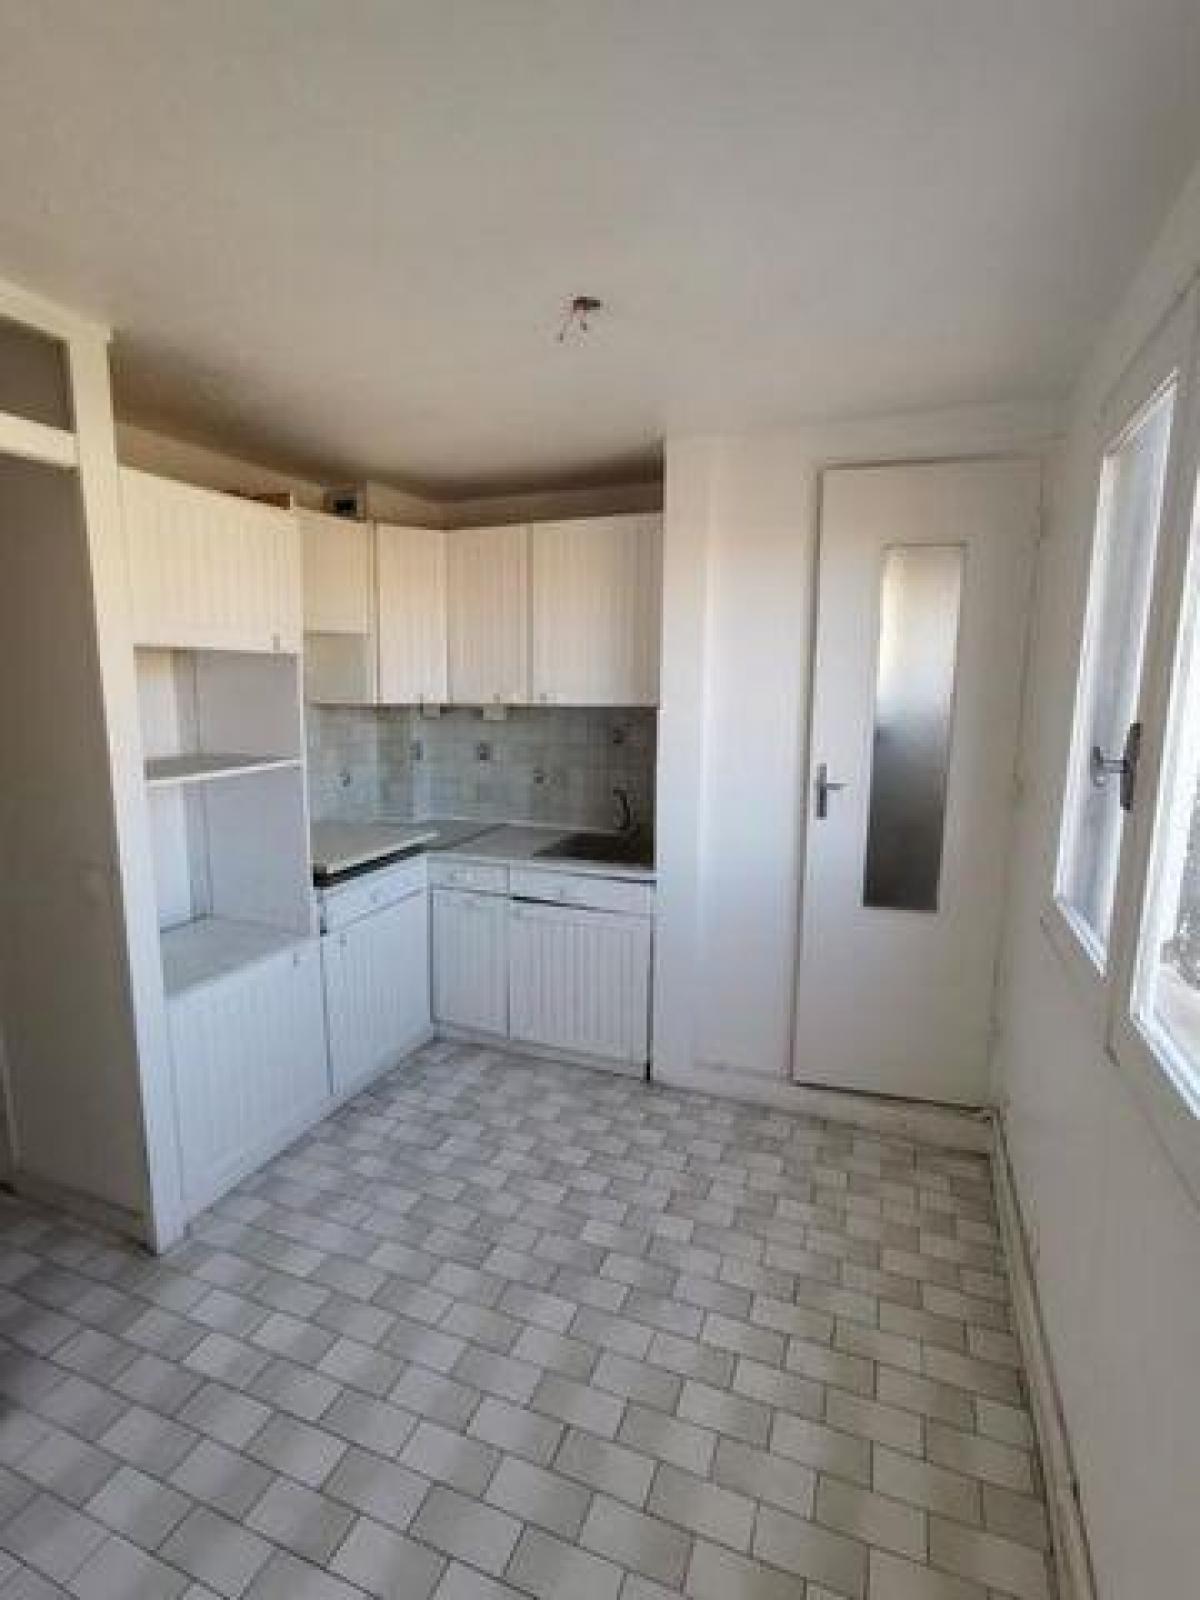 Picture of Condo For Sale in Ales, Languedoc Roussillon, France